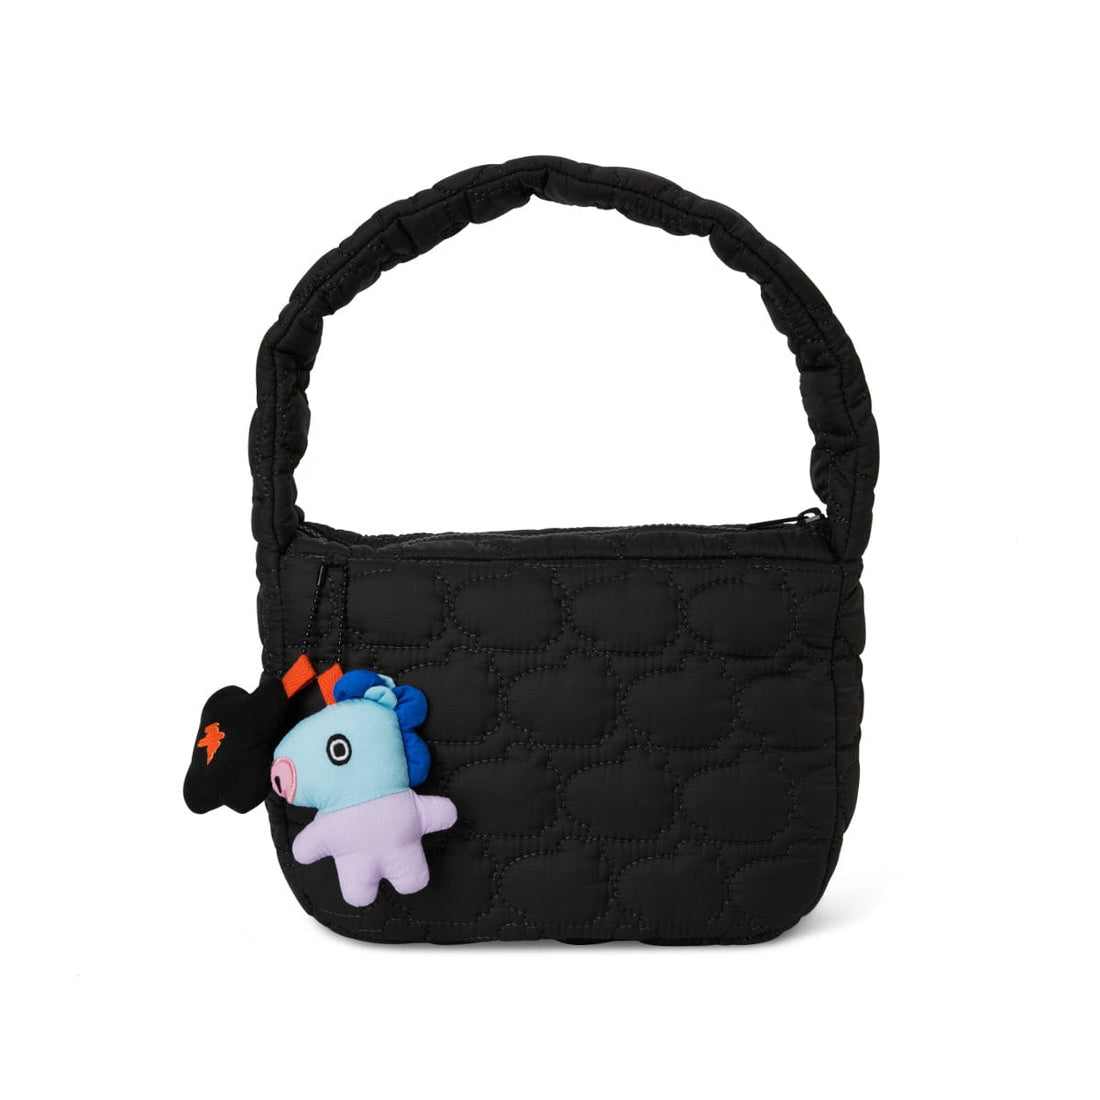 LINE FRIENDS FASHION MANG BT21 MANG WINTER BAG CHARM WITH PADDED HOBO BAG